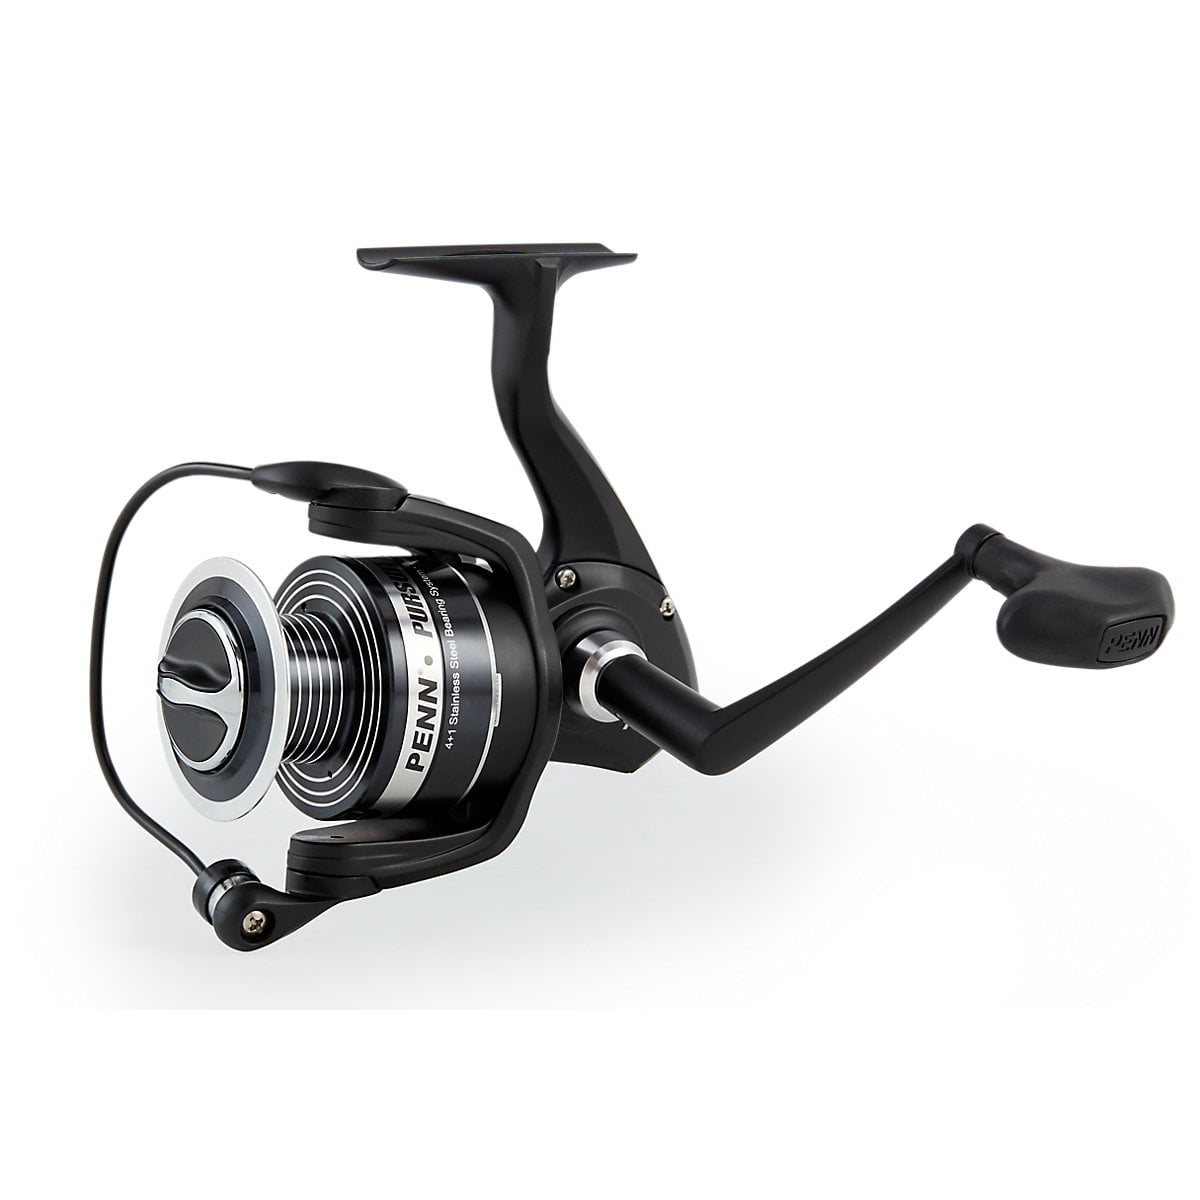 Penn Pursuit II Spin Reel 4000 Boxed 1292958 